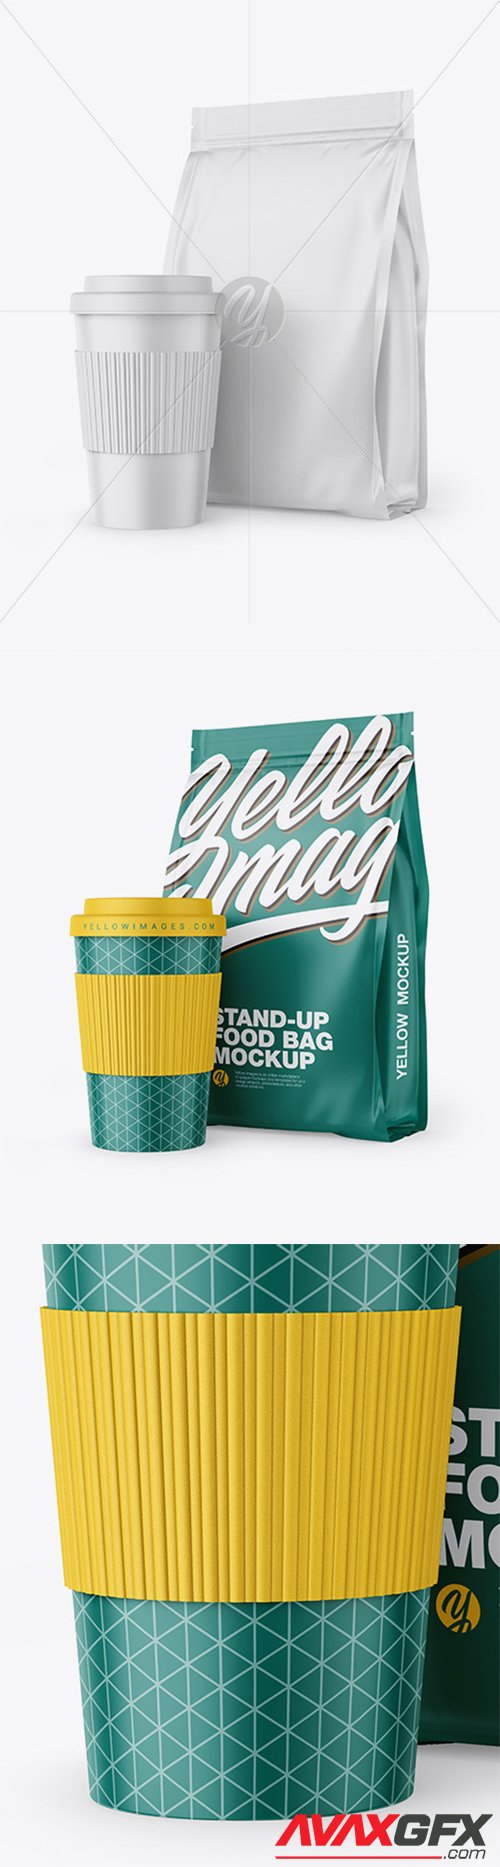 Download Matte Stand Up Bag With Coffee Cup Mockup 64586 Avaxgfx All Downloads That You Need In One Place Graphic From Nitroflare Rapidgator Yellowimages Mockups